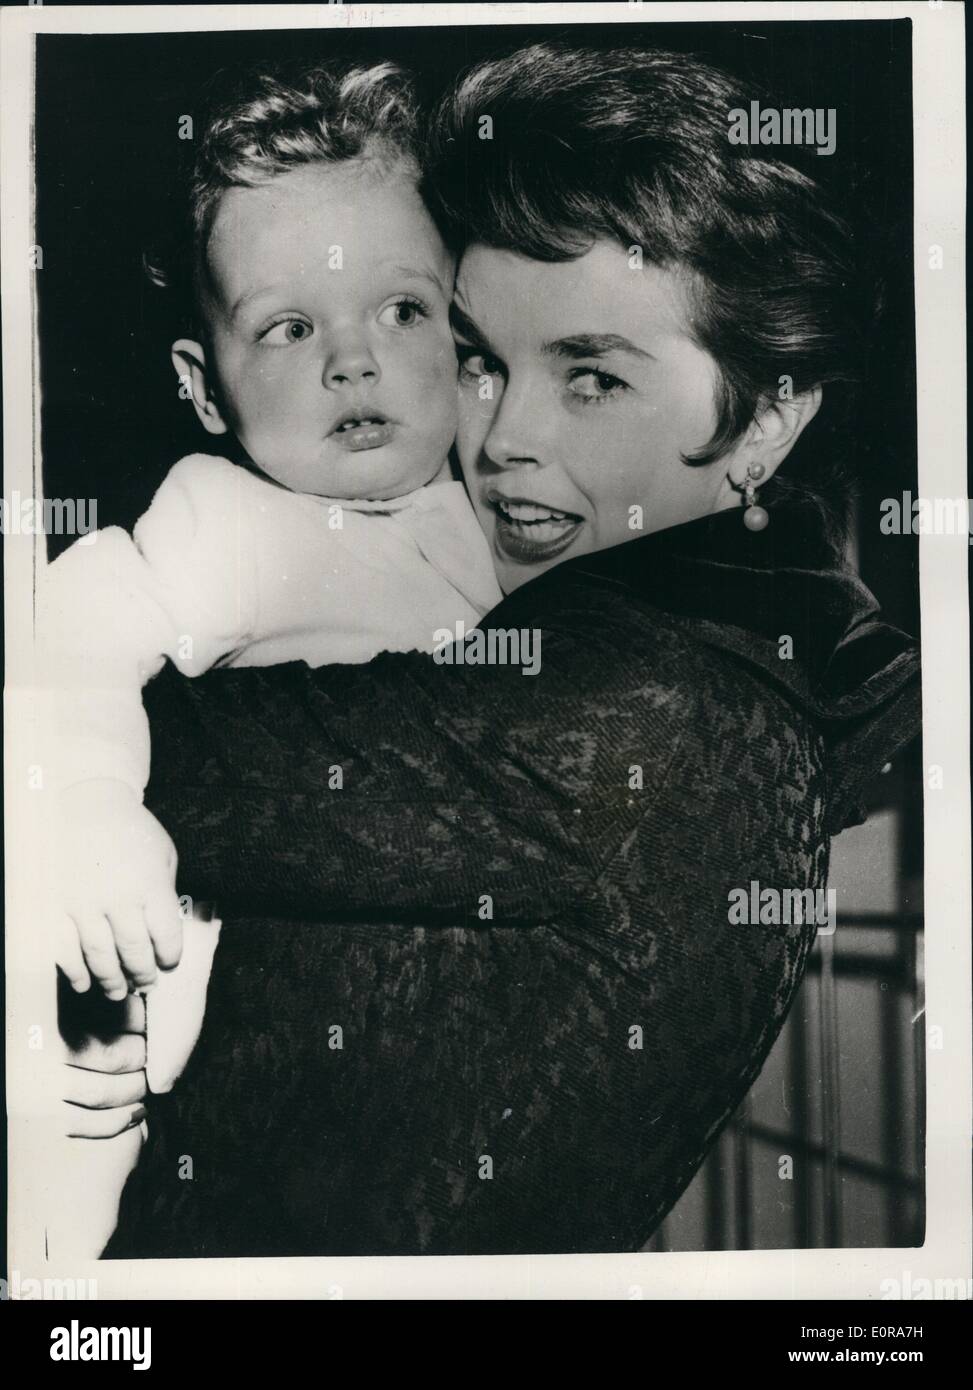 Nov. 11, 1958 - Judge gives Dawn's baby to her Italian husband: A Civil Court judge today granted a provisional decree of separation to British actress Dawn Addams and her Italian husband Prince Vittorio Massimo. Temporary custody of their only child, 3 year old Stefano, was given to the Prince. The judge made provision for Dawn to see the child any time. Photo shows Dawn Addams pictured with her young son Stephano. Stock Photo